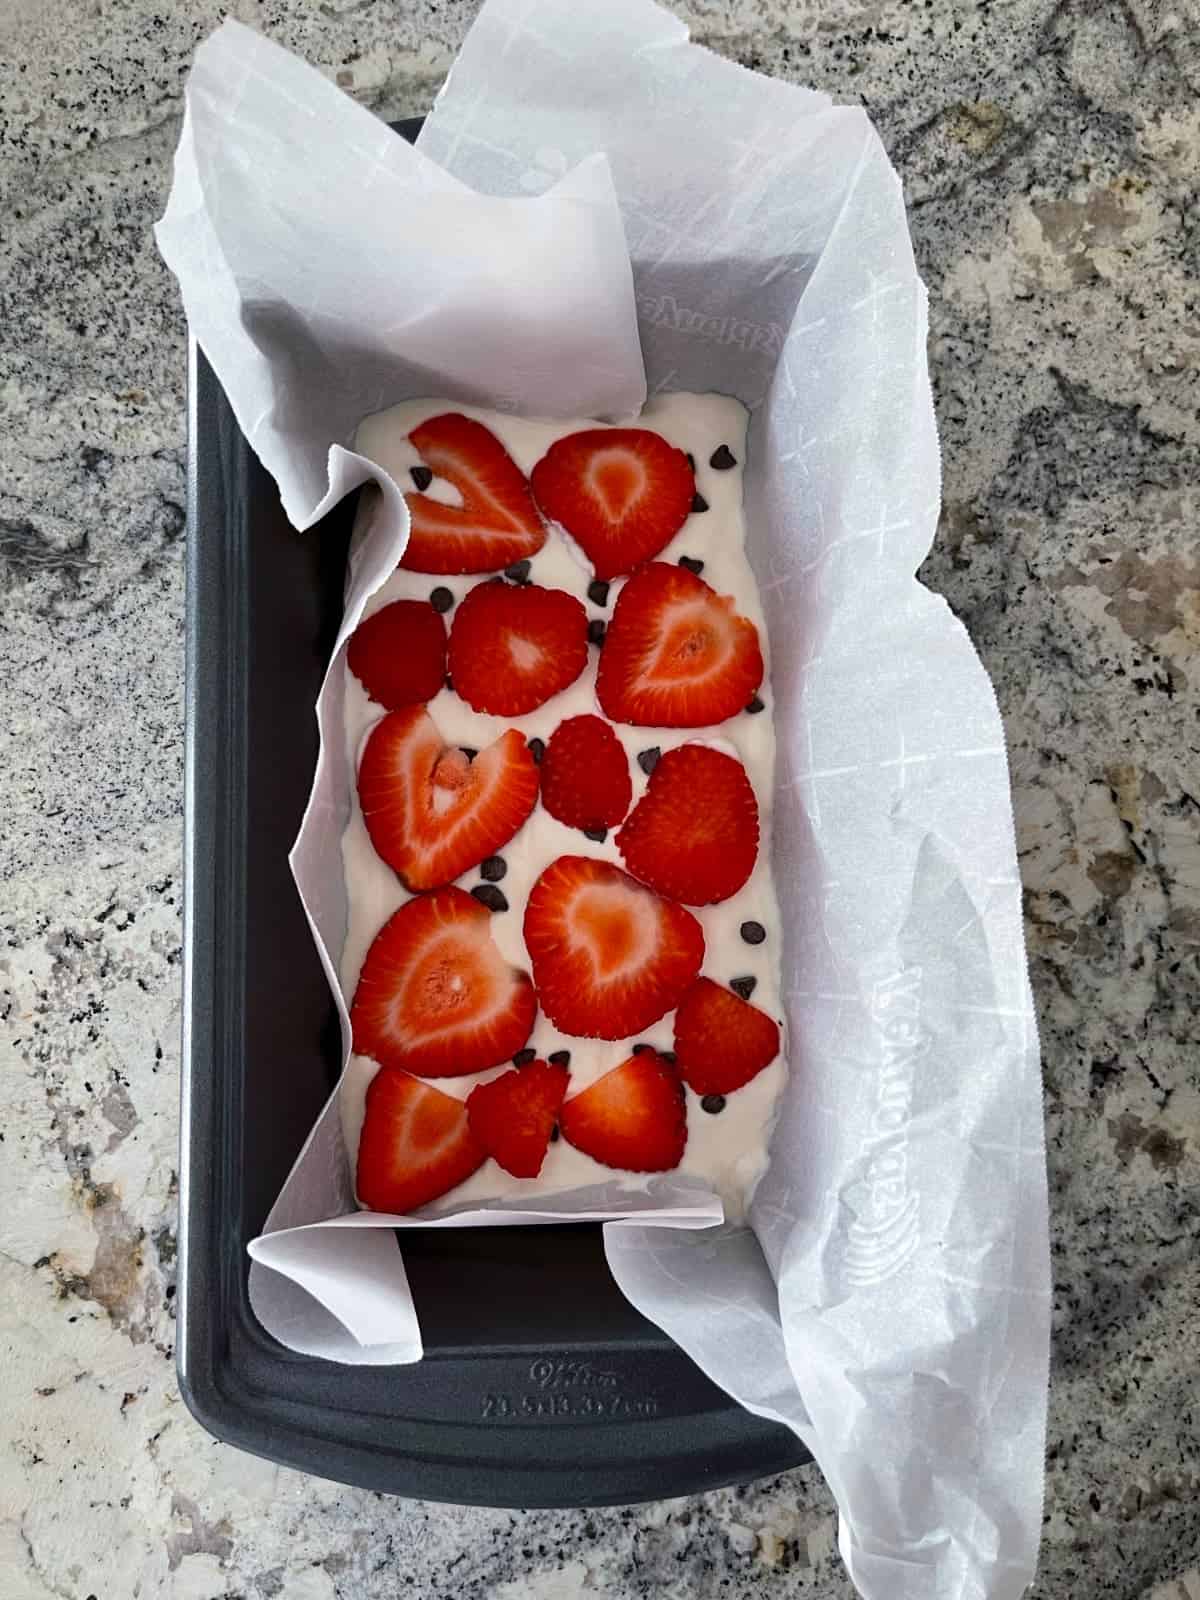 Layering sliced strawberries and chocolate chips over sweetened Greek yogurt in parchment-lined loaf pan.